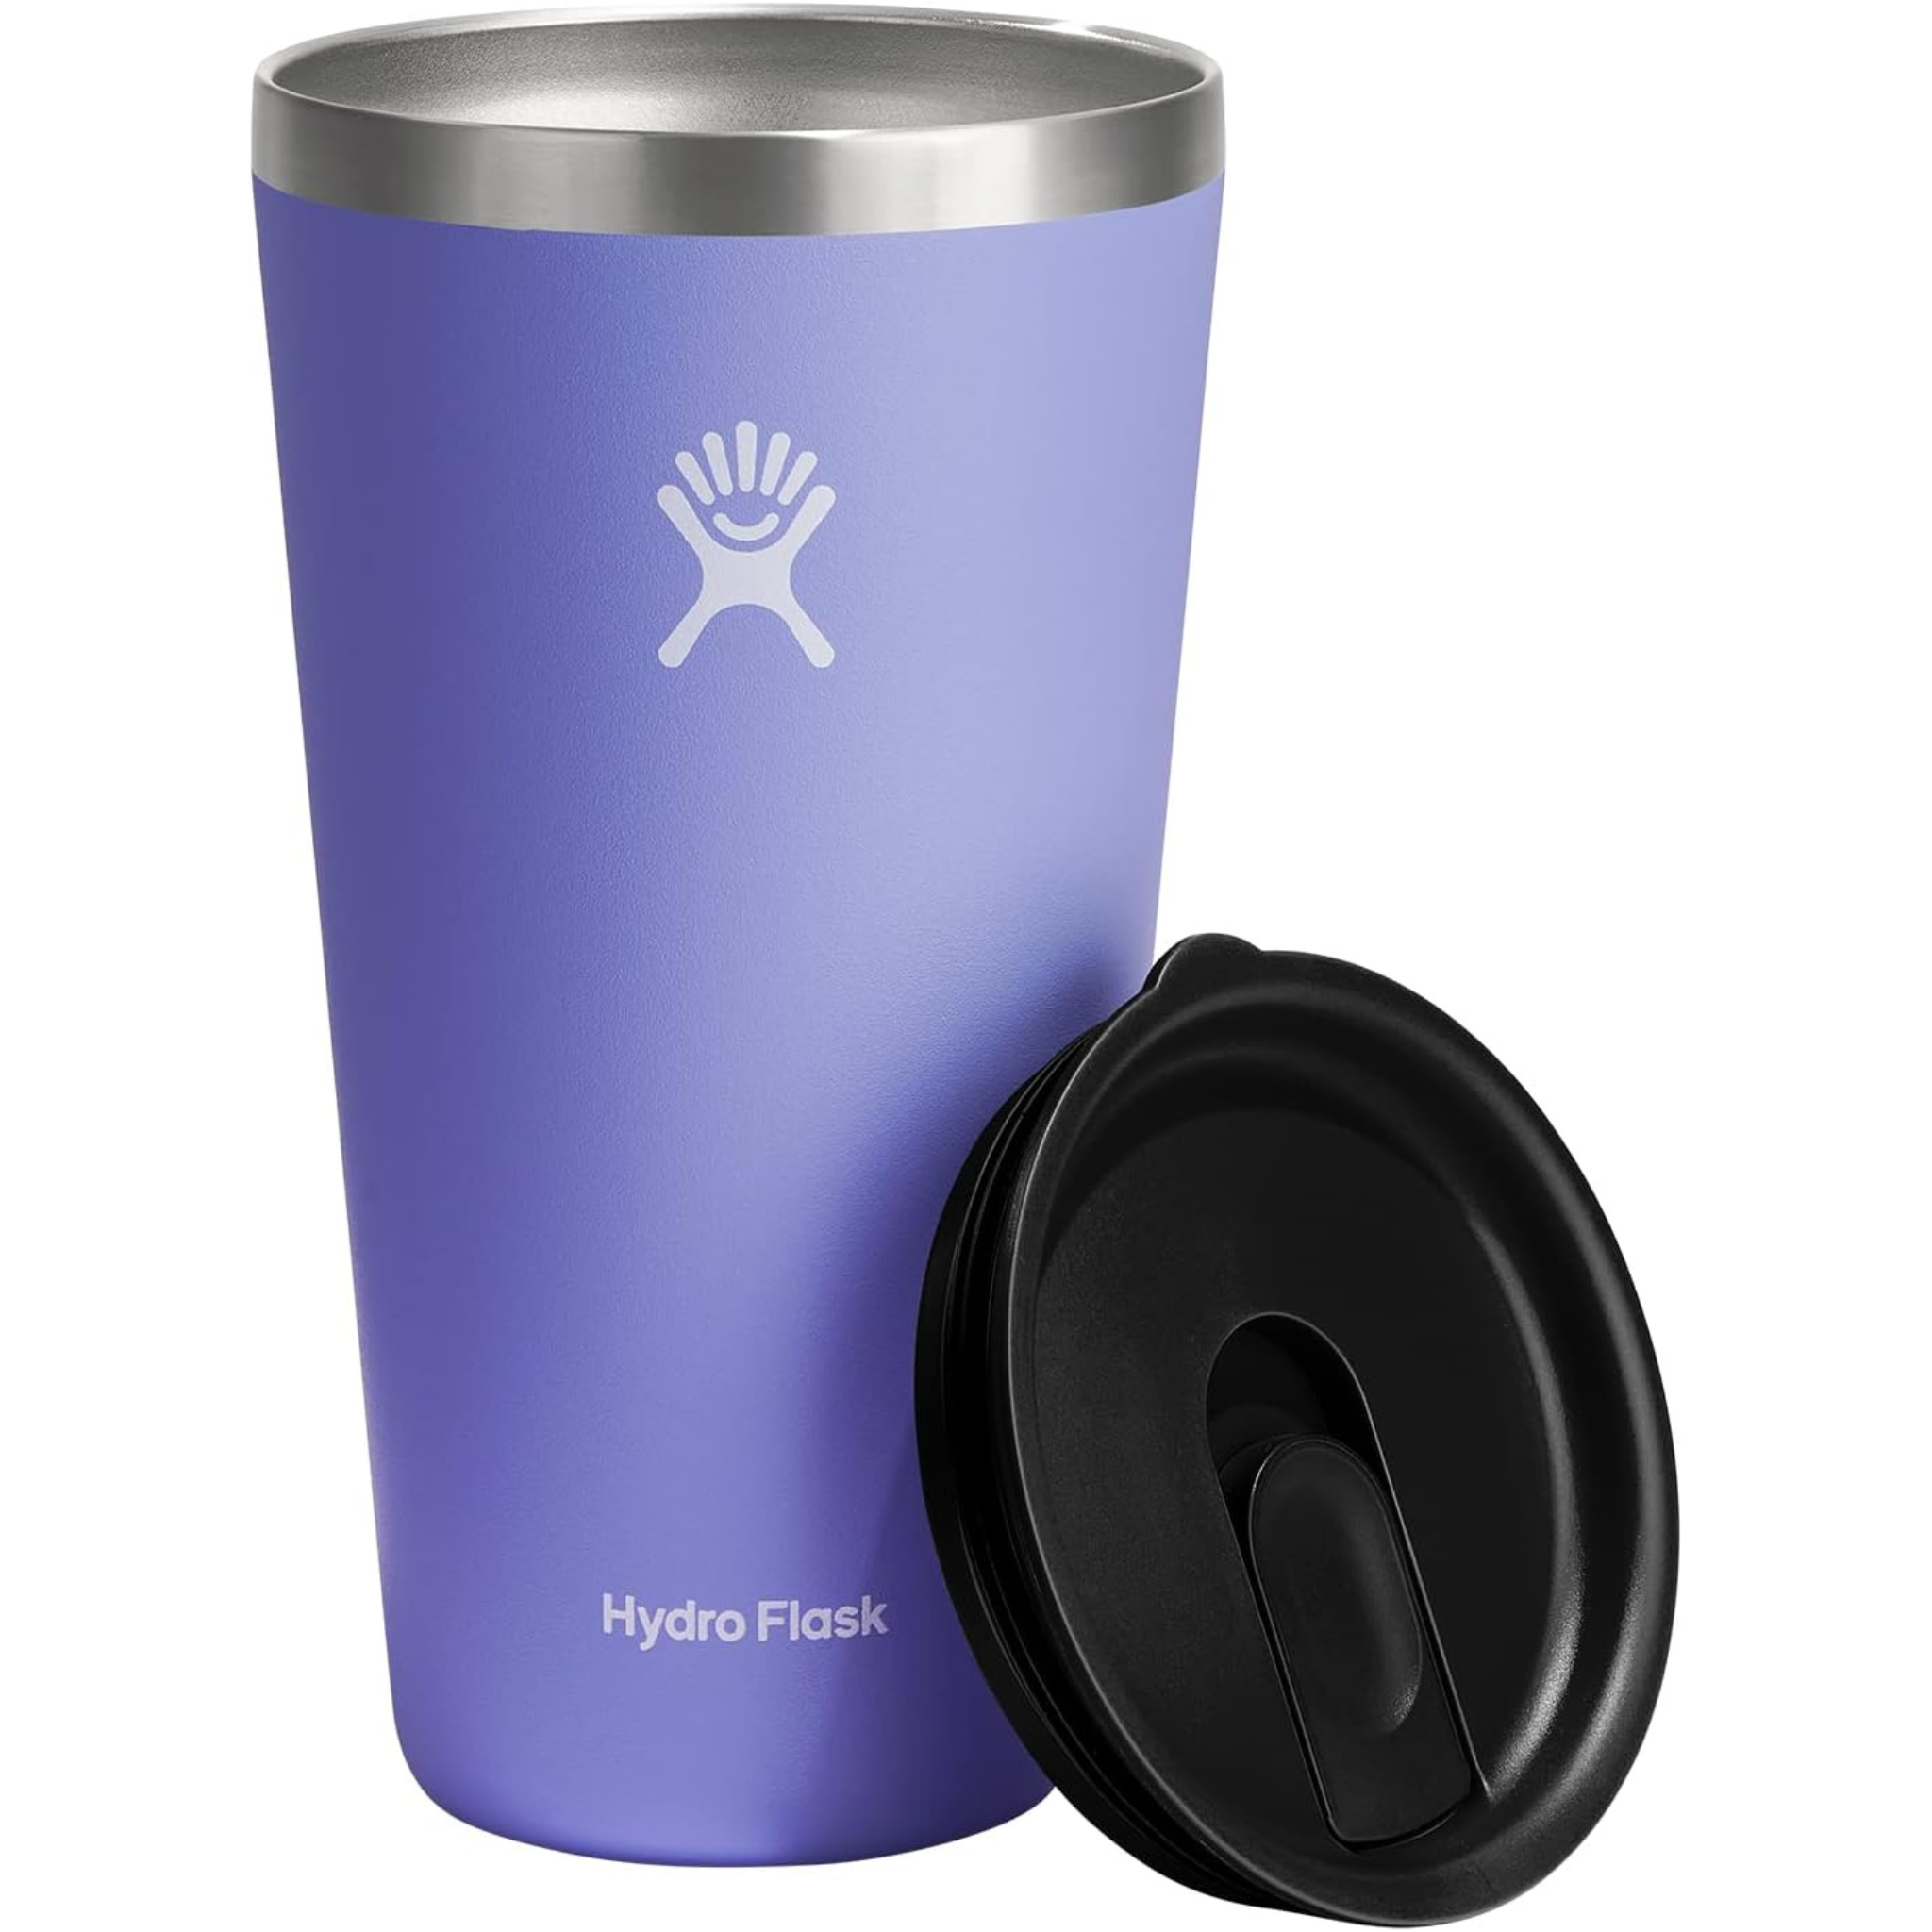 Hydro Flask 28-Oz Stainless Steel Insulated Tumbler with Lid